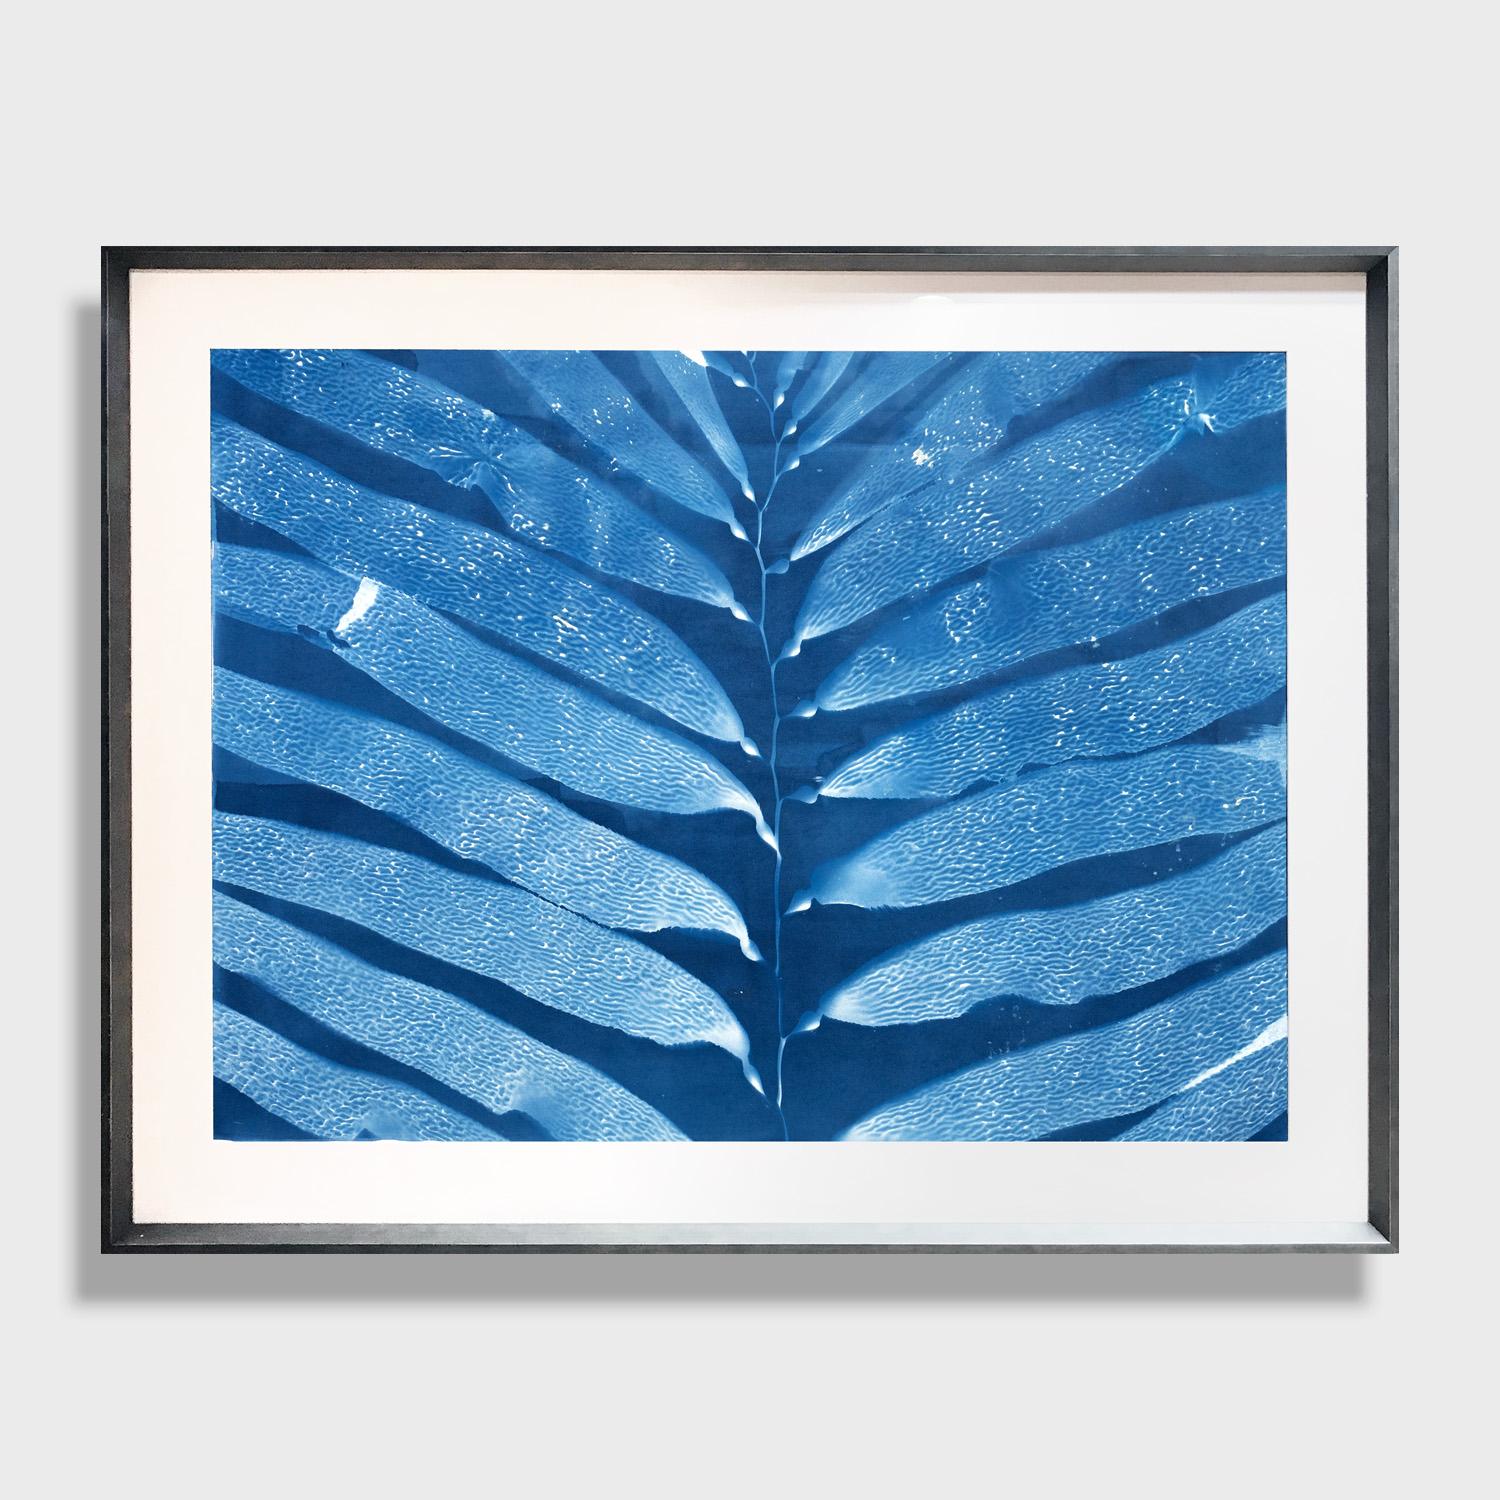 This is a one of a kind original color cyanotype color photograph by San Diego artist, Oriana Poindexter. Its dimensions are 56